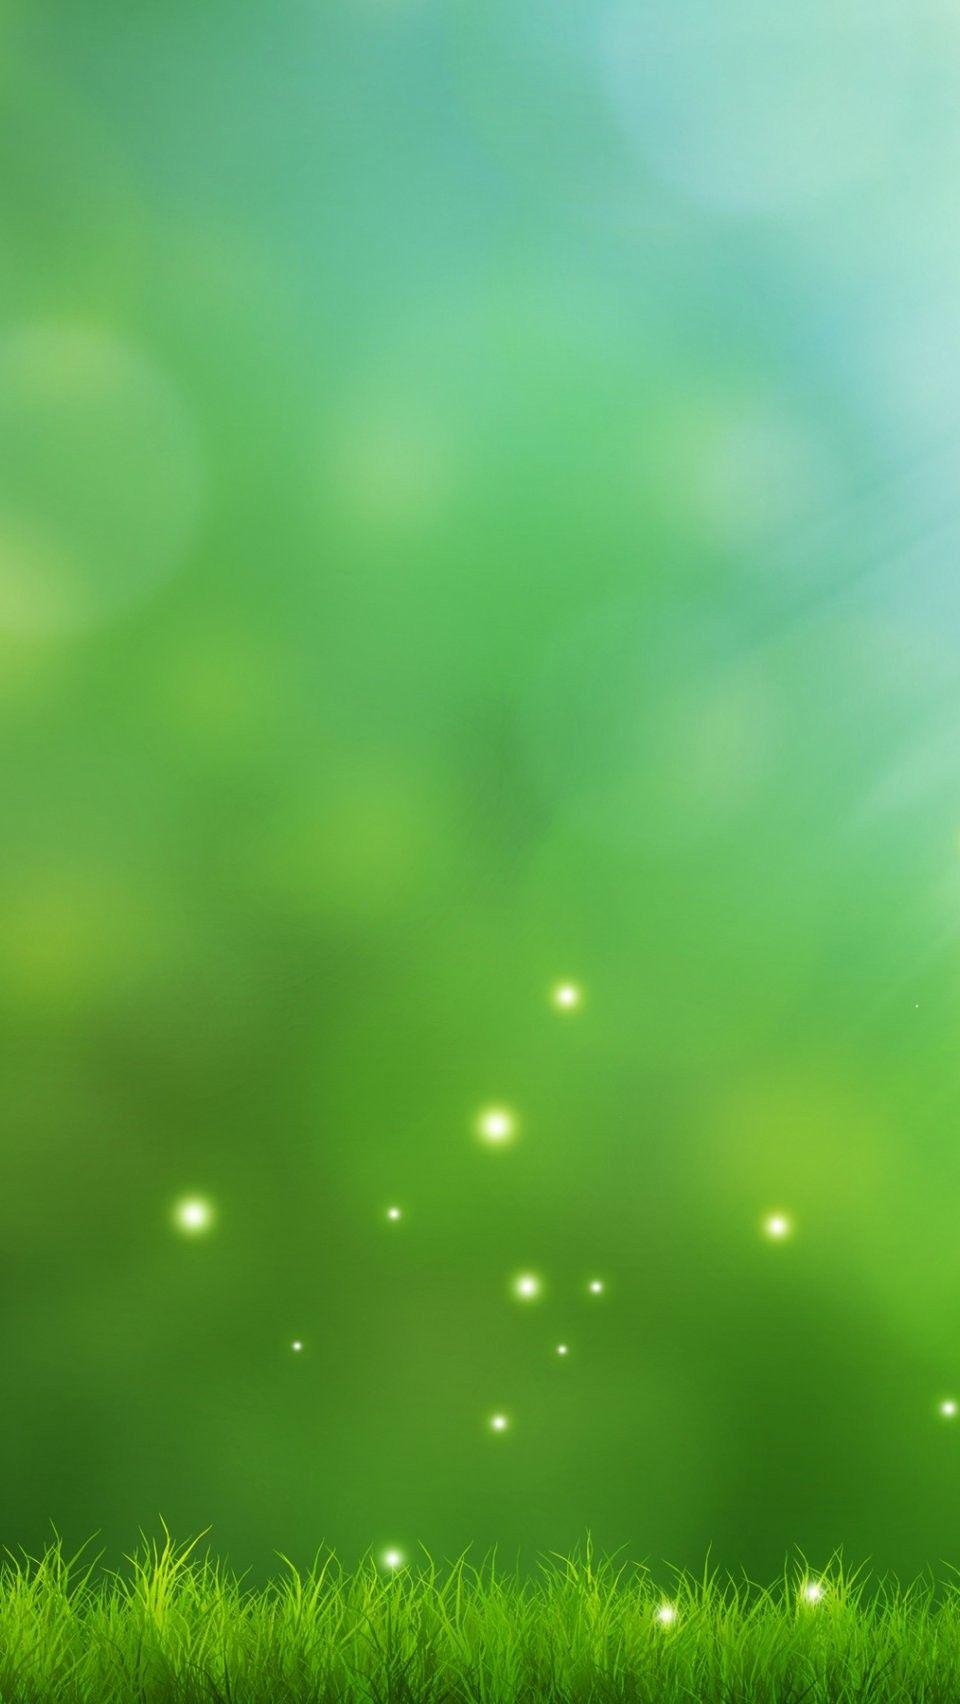 Background image free download